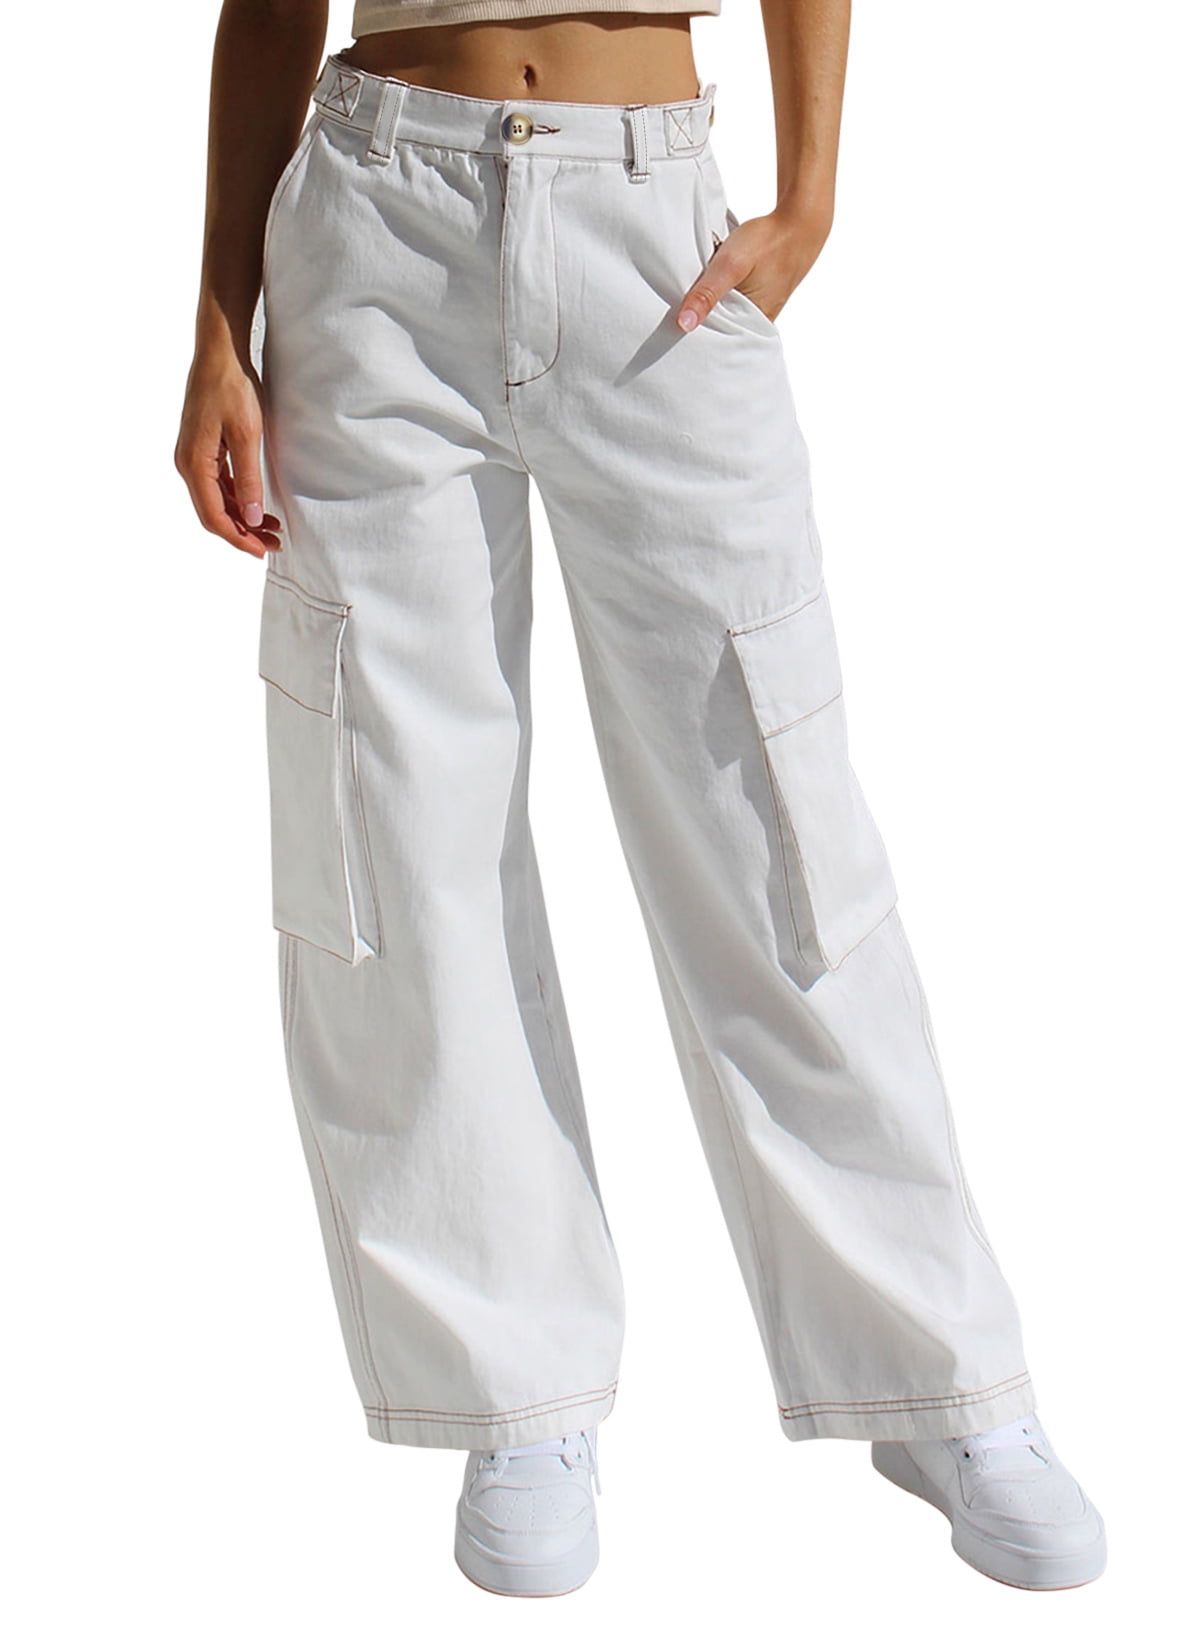 HOTAPEI Baggy Cargo Pants for Women Casual Wide Leg Pants Loose High ...